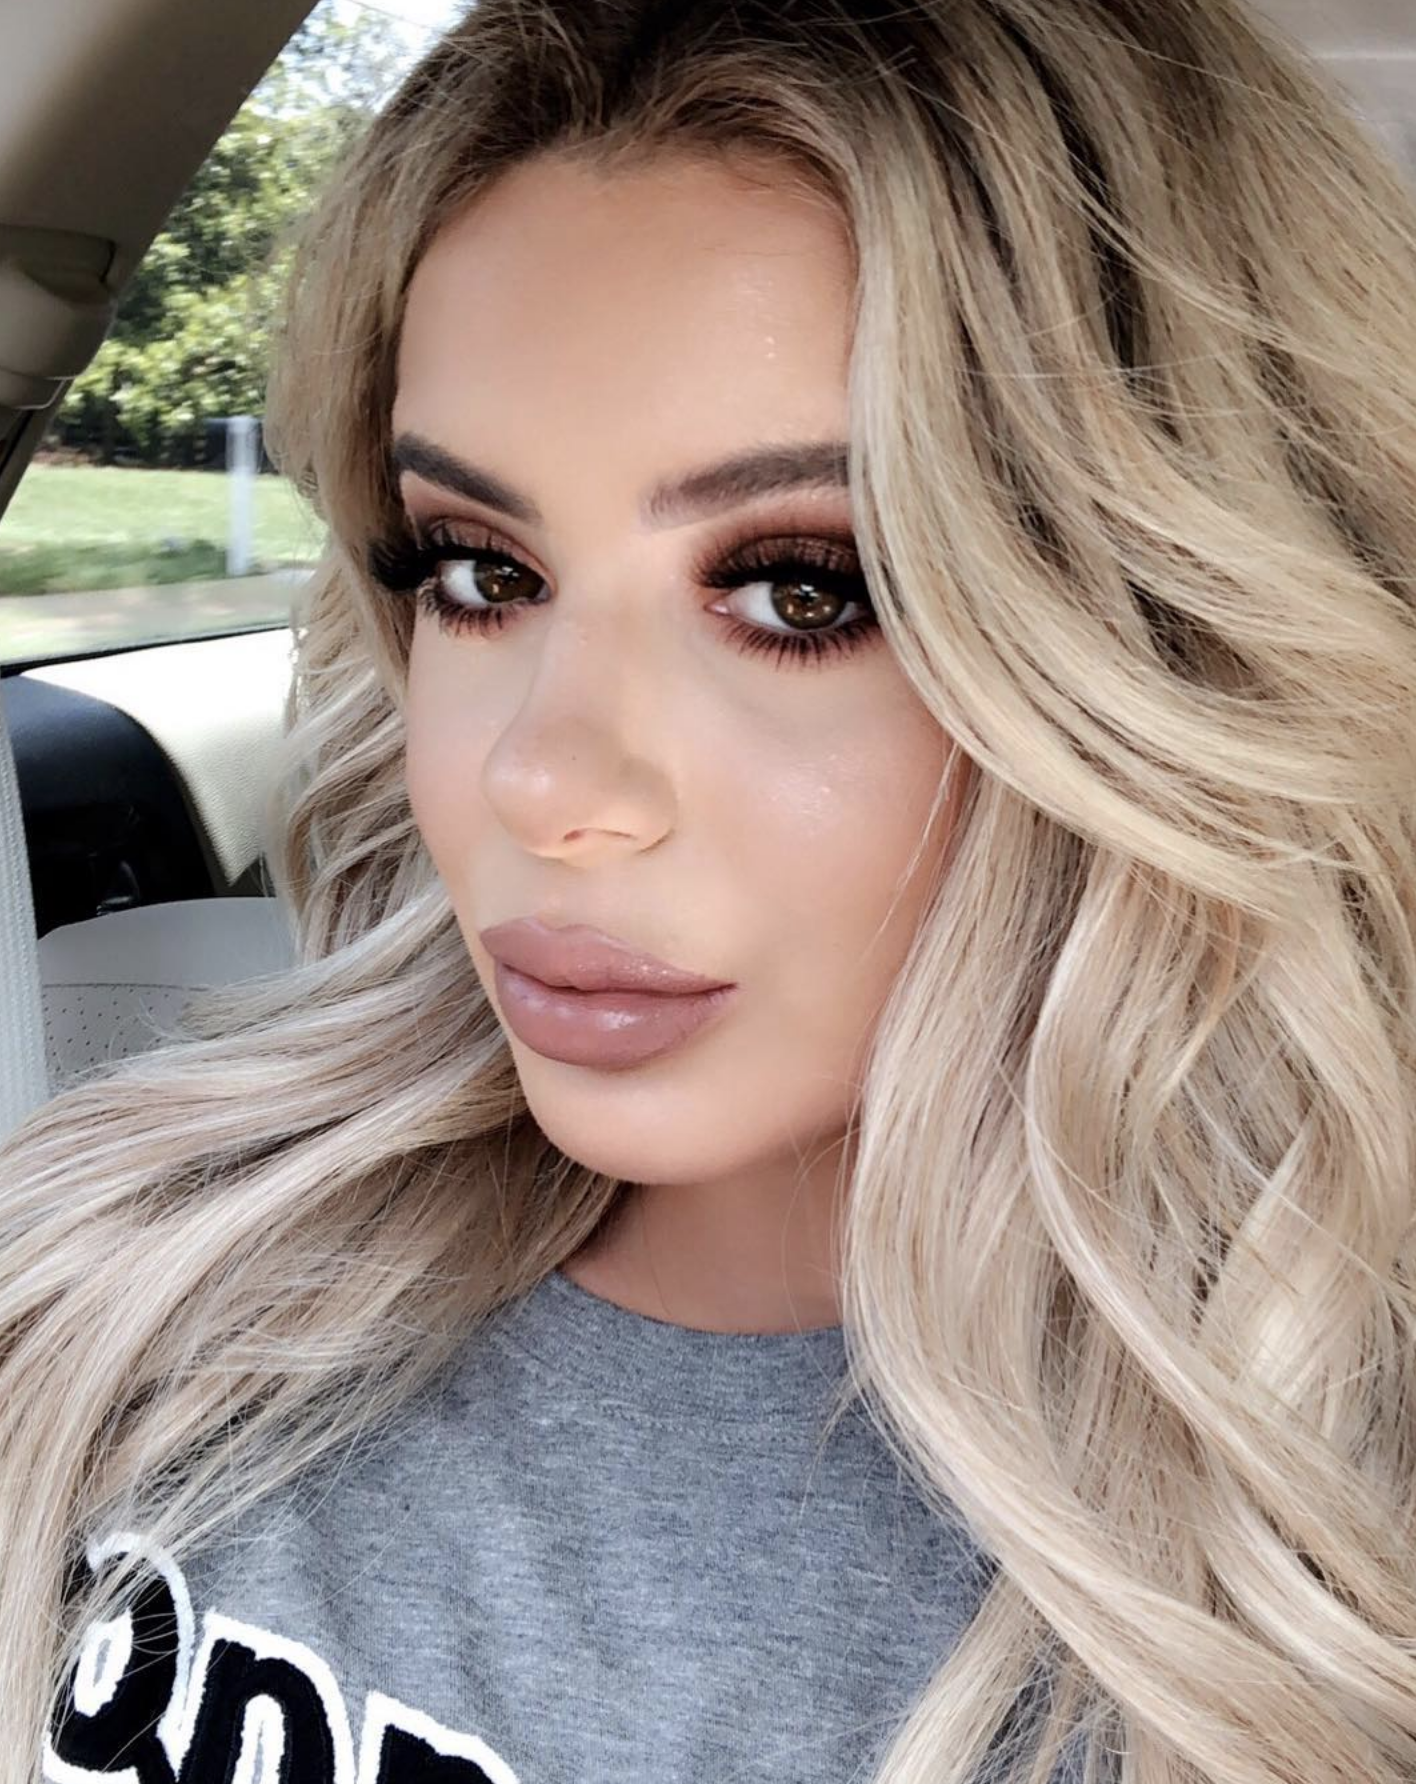 <p>"Don't Be Tardy" star Brielle Biermann has no problem taking on critics who attack her for inflating her pout. "To those who say I look better before lips… you're a liar and this photo is PROOOOOOF," she captioned an old pic of herself that she's since deleted. Brielle's long been unapologetic about her affinity for fillers. "Going to get my duck lips plumped up some more!! C ya!" she tweeted in March 2018. But less than two years later, she'd changed her tune...</p>